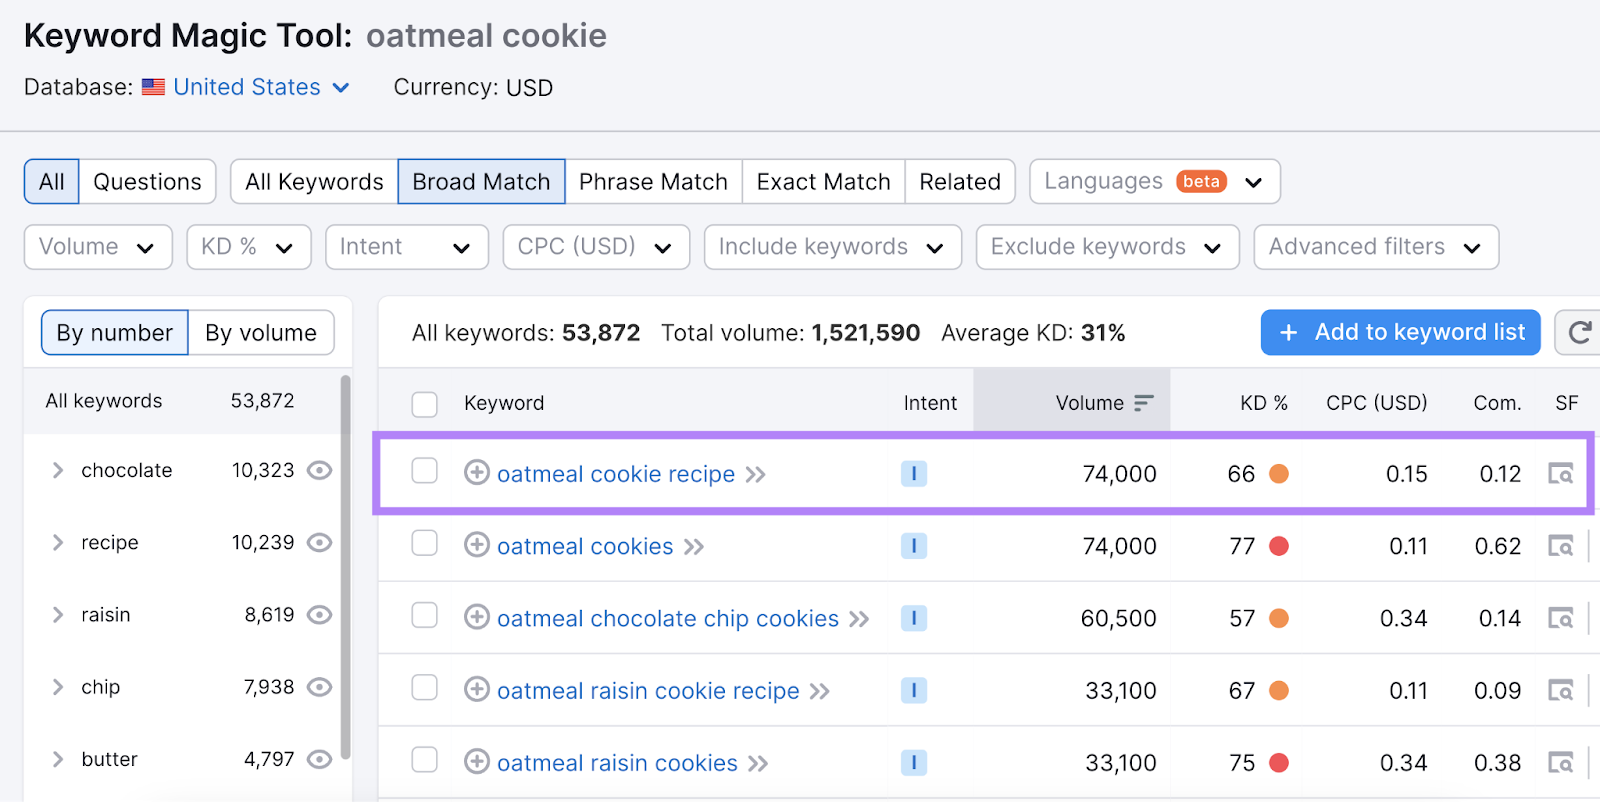 "oatmeal cooky  recipe" has 66% keyword trouble  compared to "oatmeal cookies" with has 77% keyword difficulty